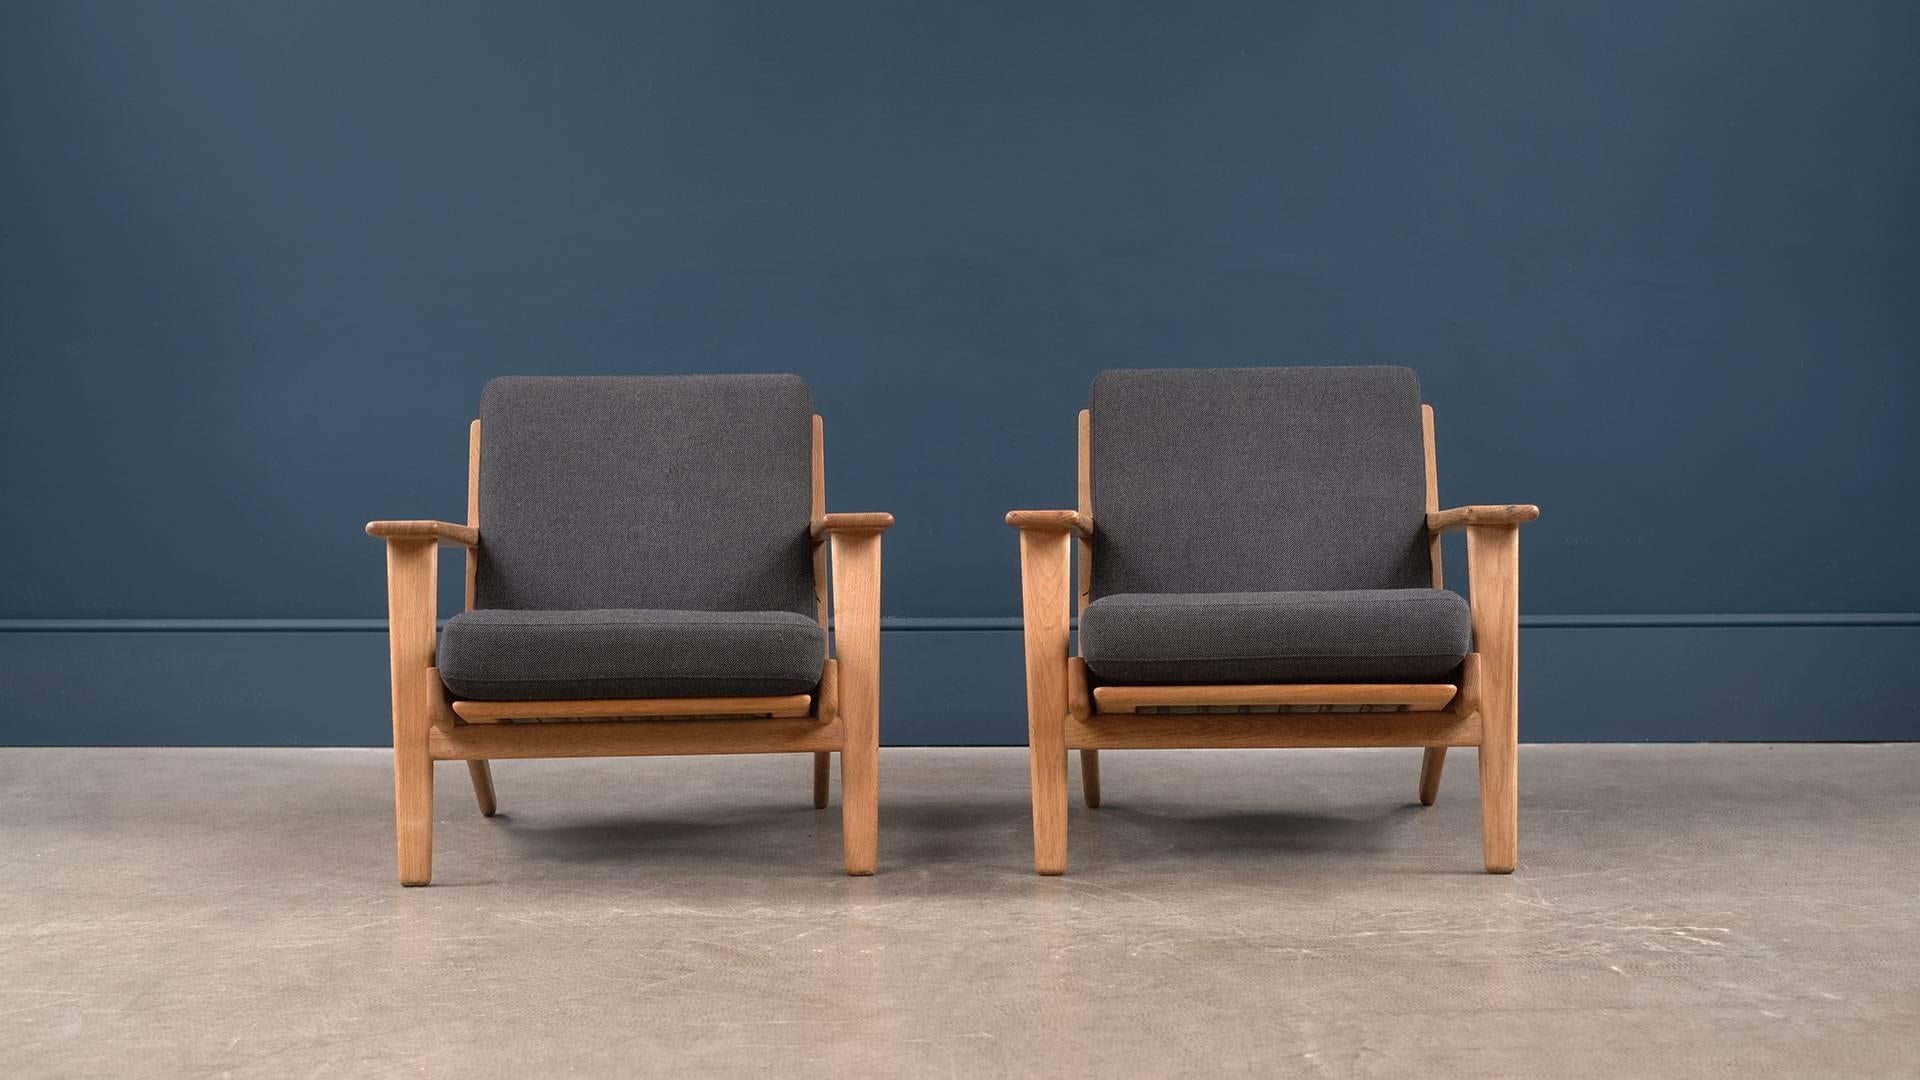 Fantastic GE290 lounge chairs designed by Hans Wegner for Getama, Denmark. Solid oak frames with original sprung cushions with beautiful charcoal fabric. Other upholstery options available. 